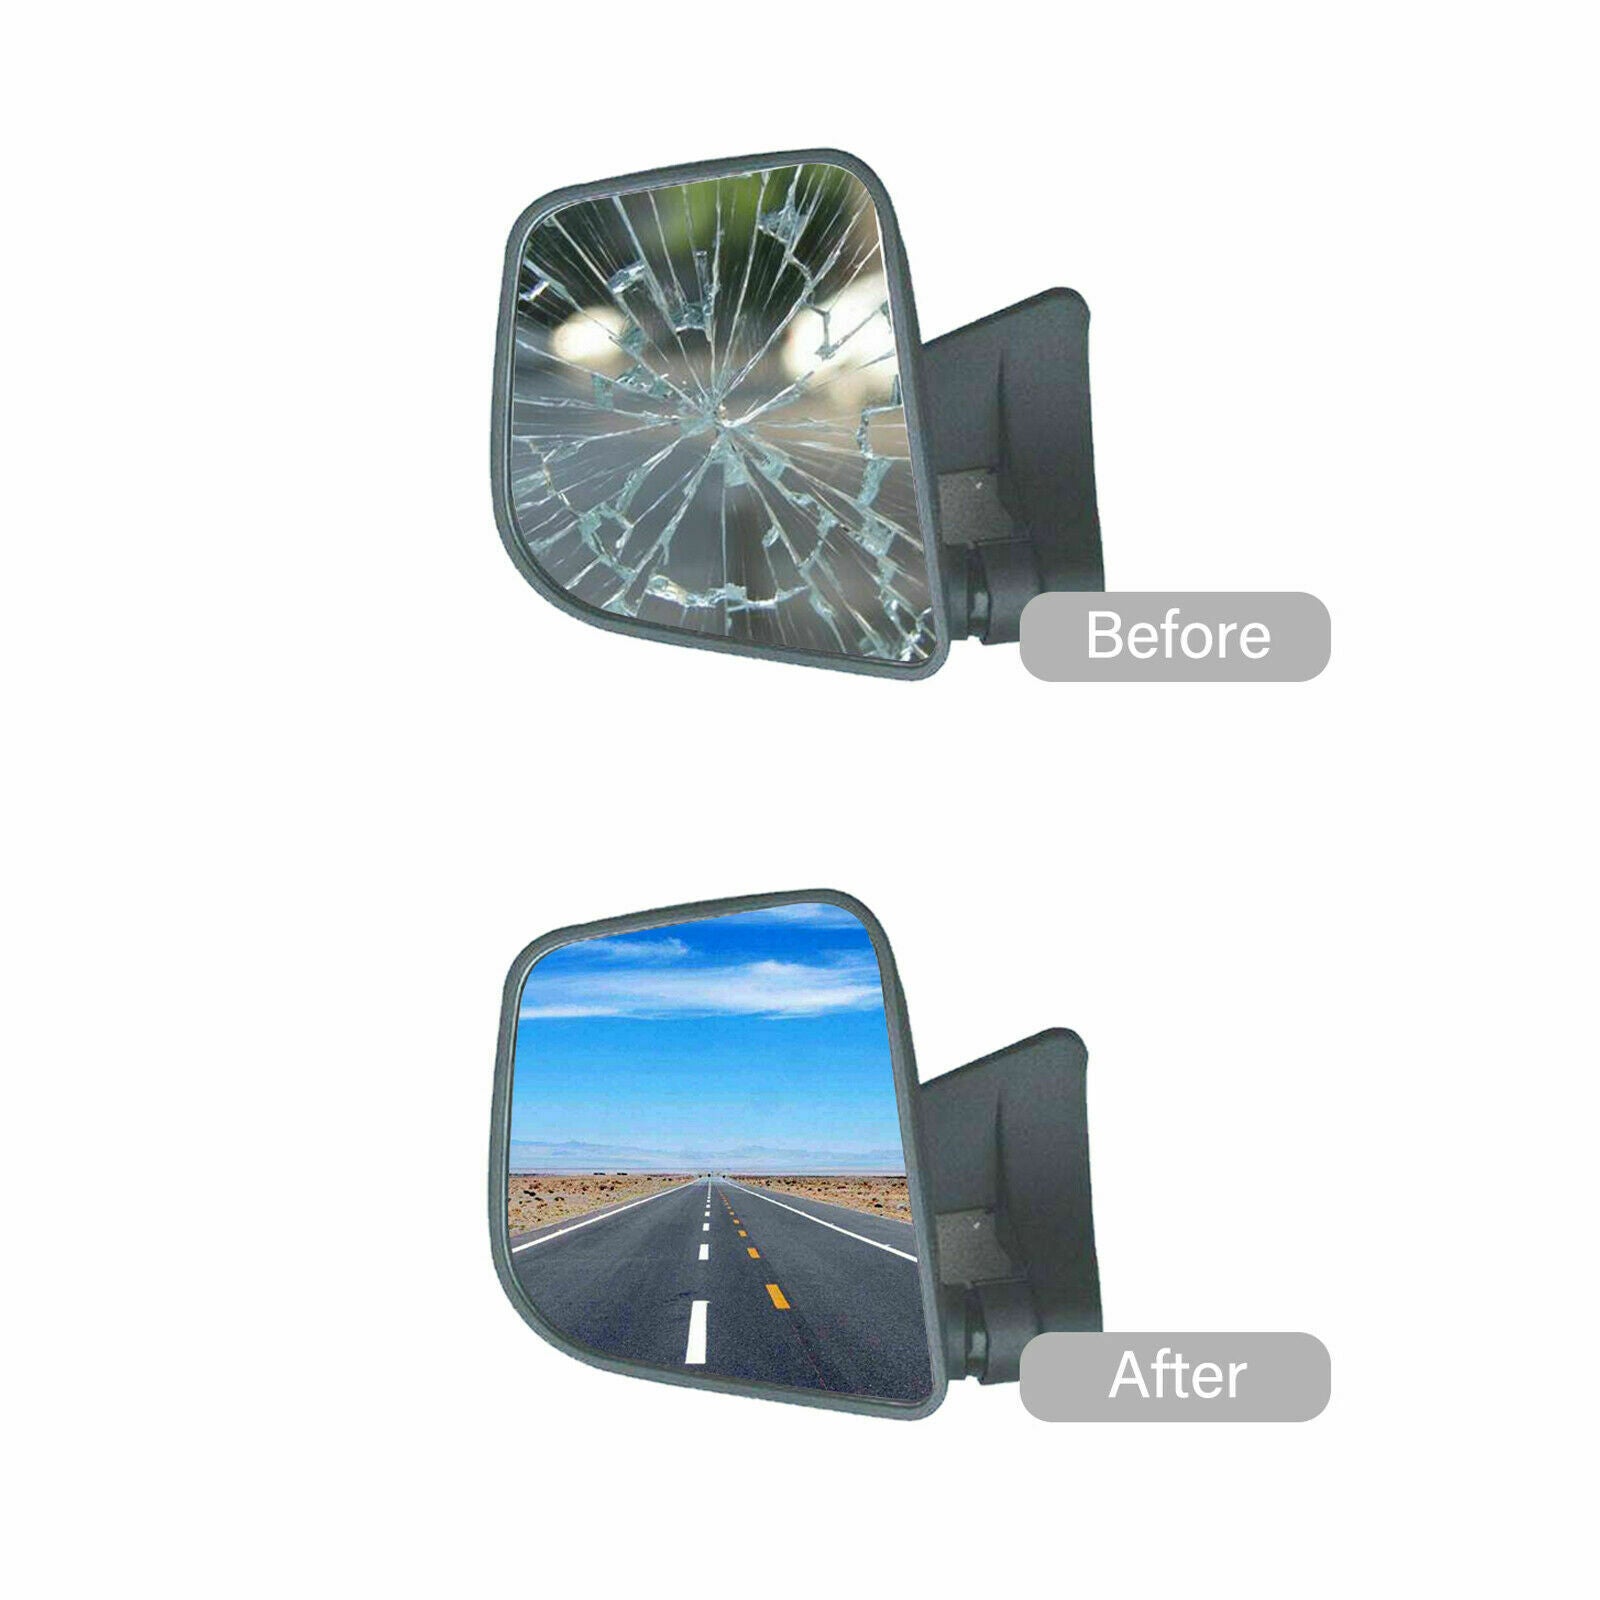 WLLW a pair of Towing Replacement Mirror Glass for 2010-2023 Dodge Ram Pickup Full Size, Driver Left Side LH/Passenger Right Side RH/The Both Sides Upper&Lower Flat Convex D-0006